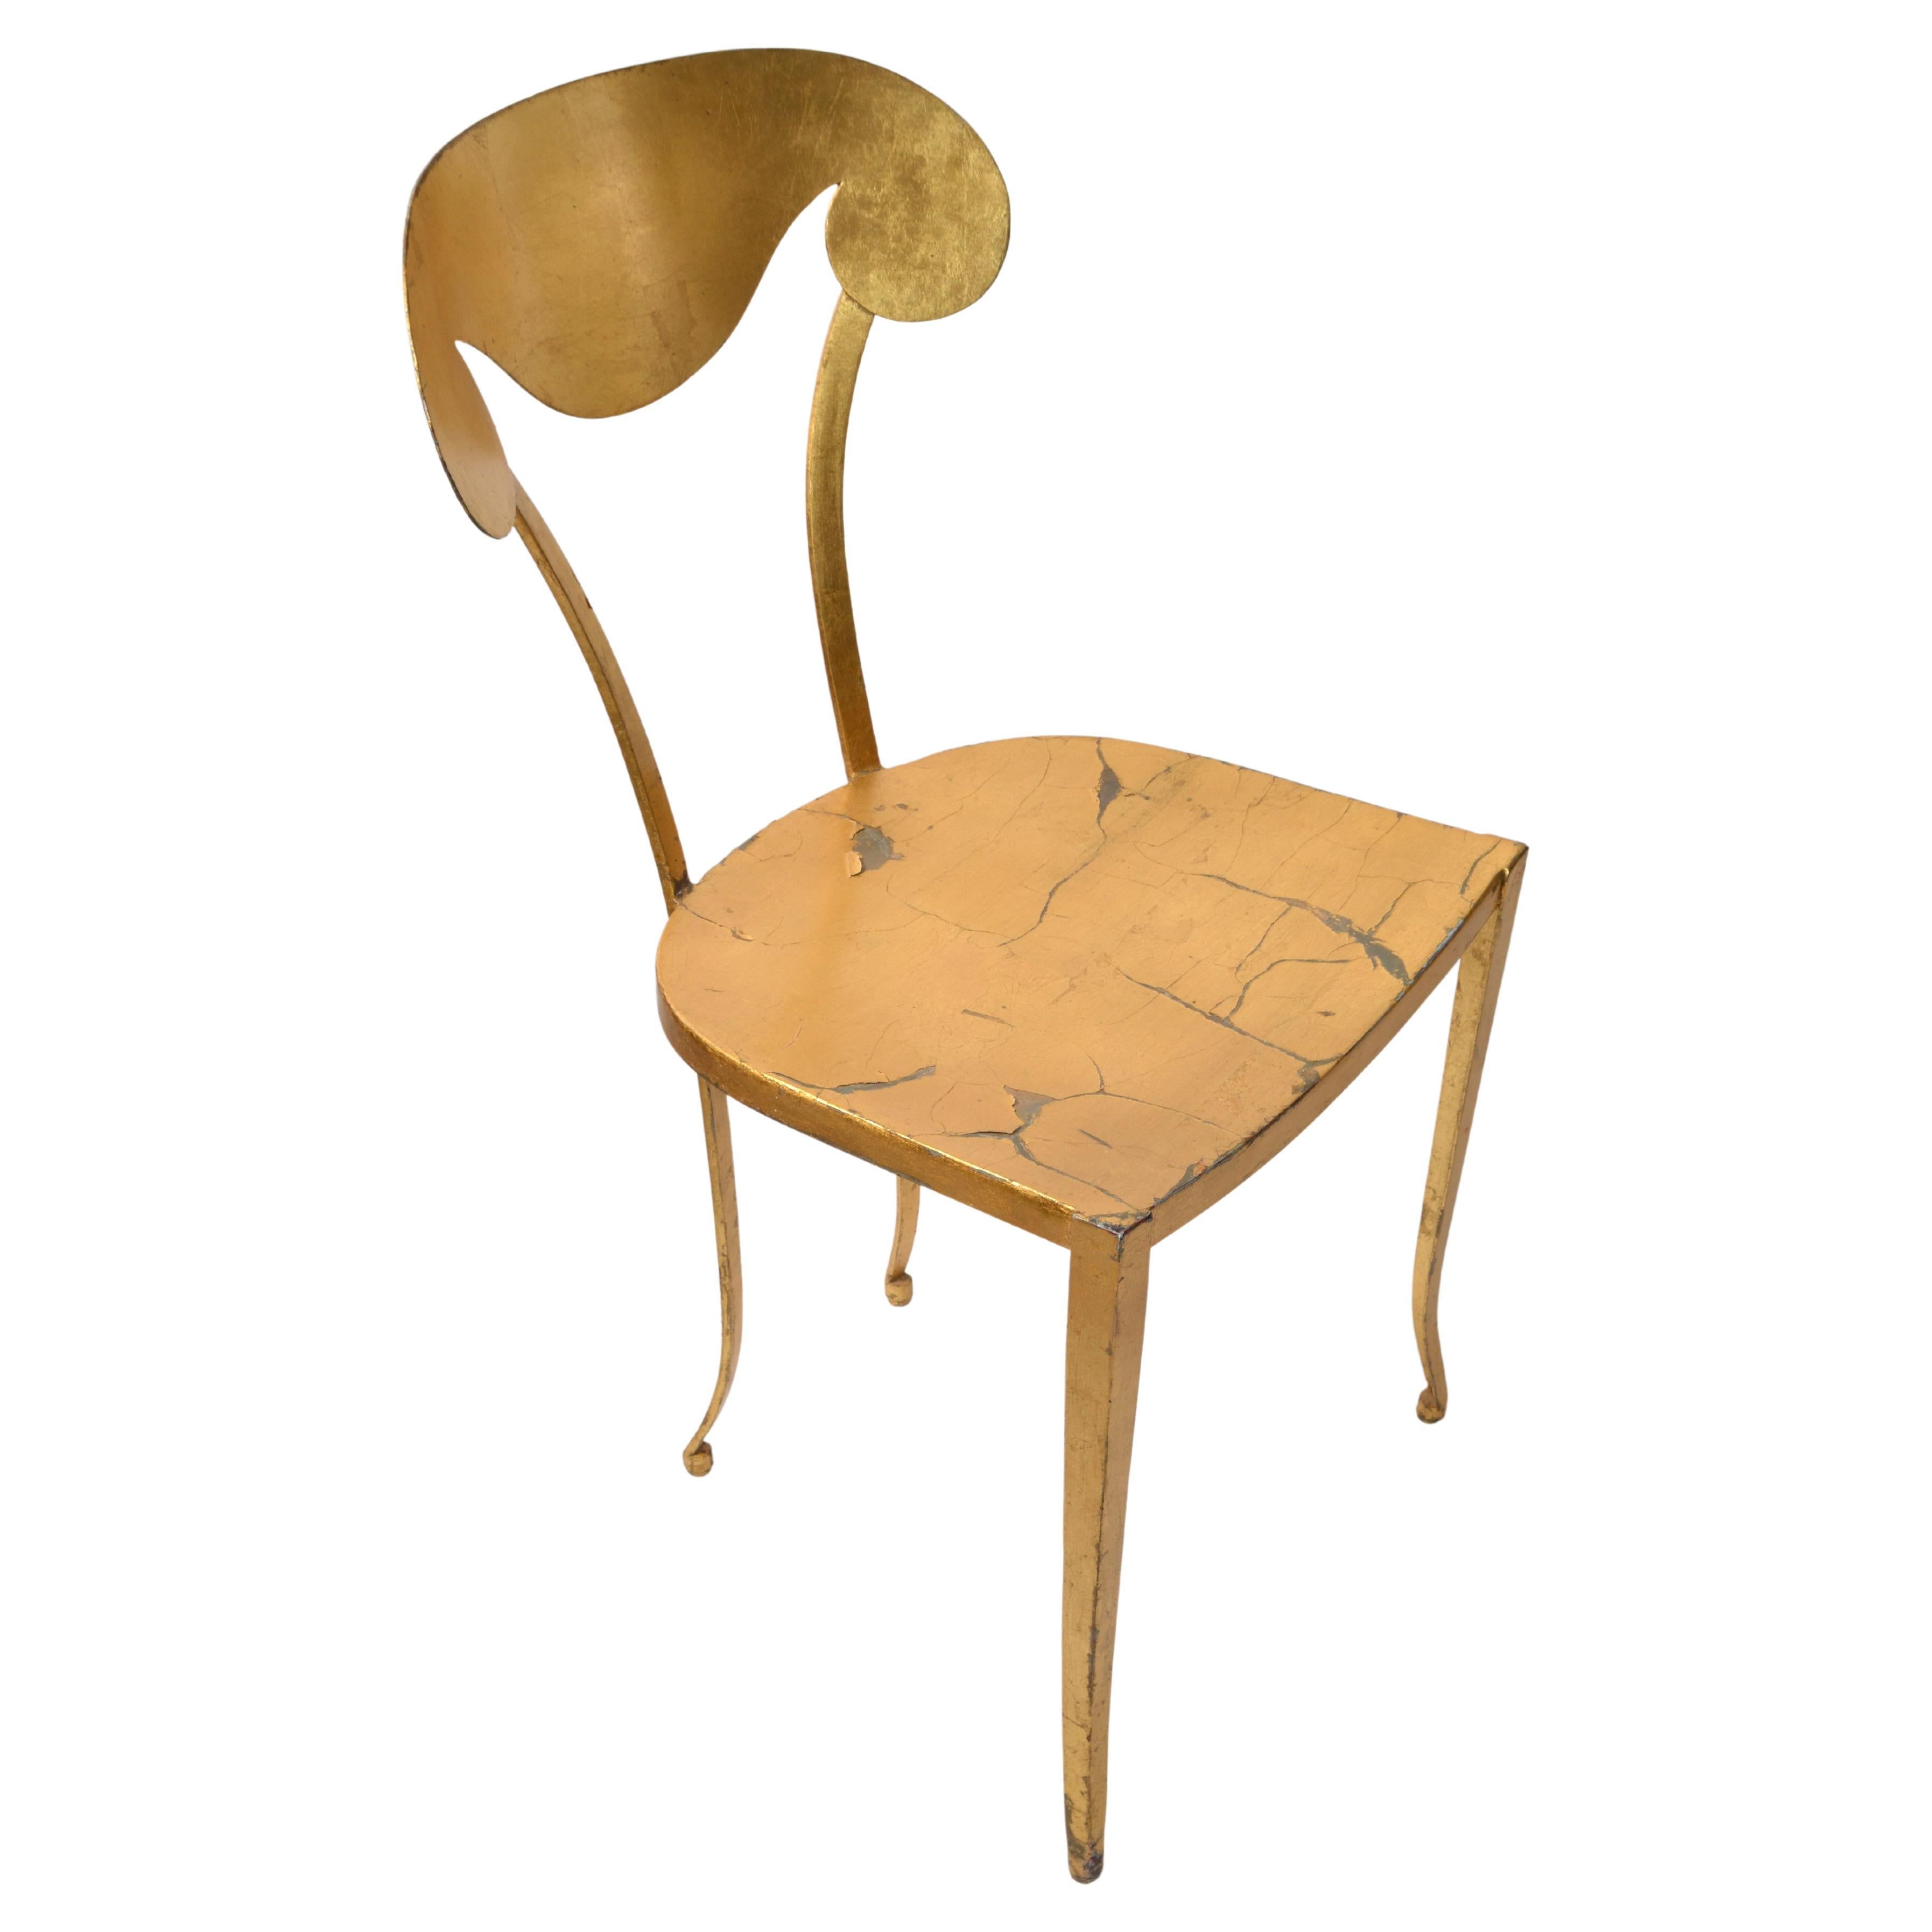 Italian Art Deco Style Sculptural Gilt Steel Vanity Desk Side Chair Distressed In Good Condition For Sale In Miami, FL